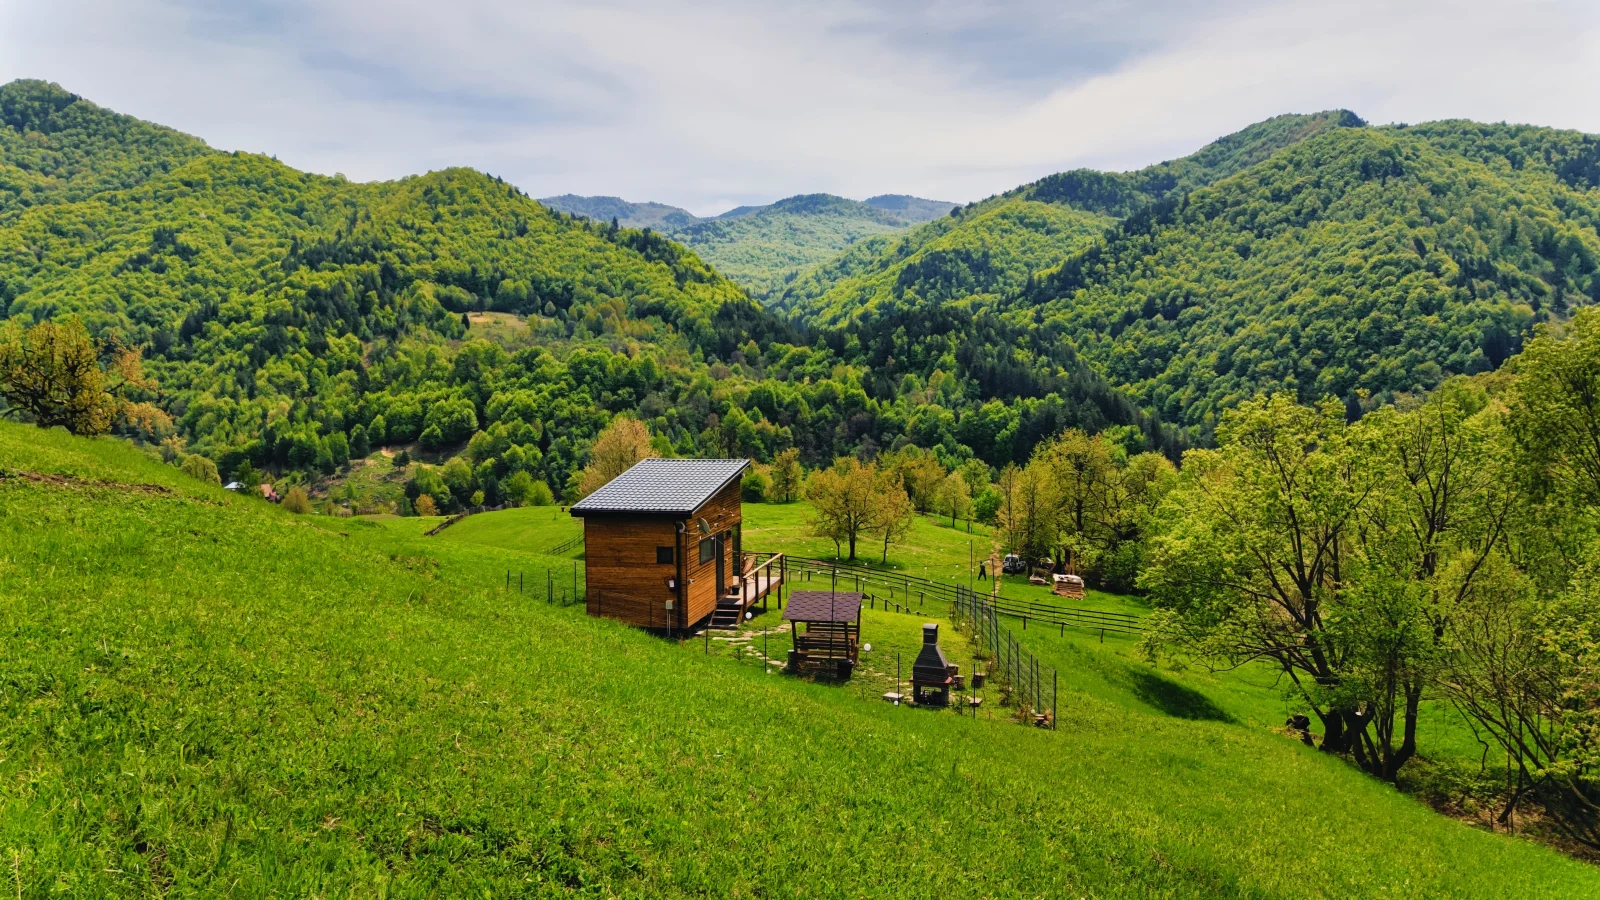 Remote accommodations in Romania. Reconnecting with nature.